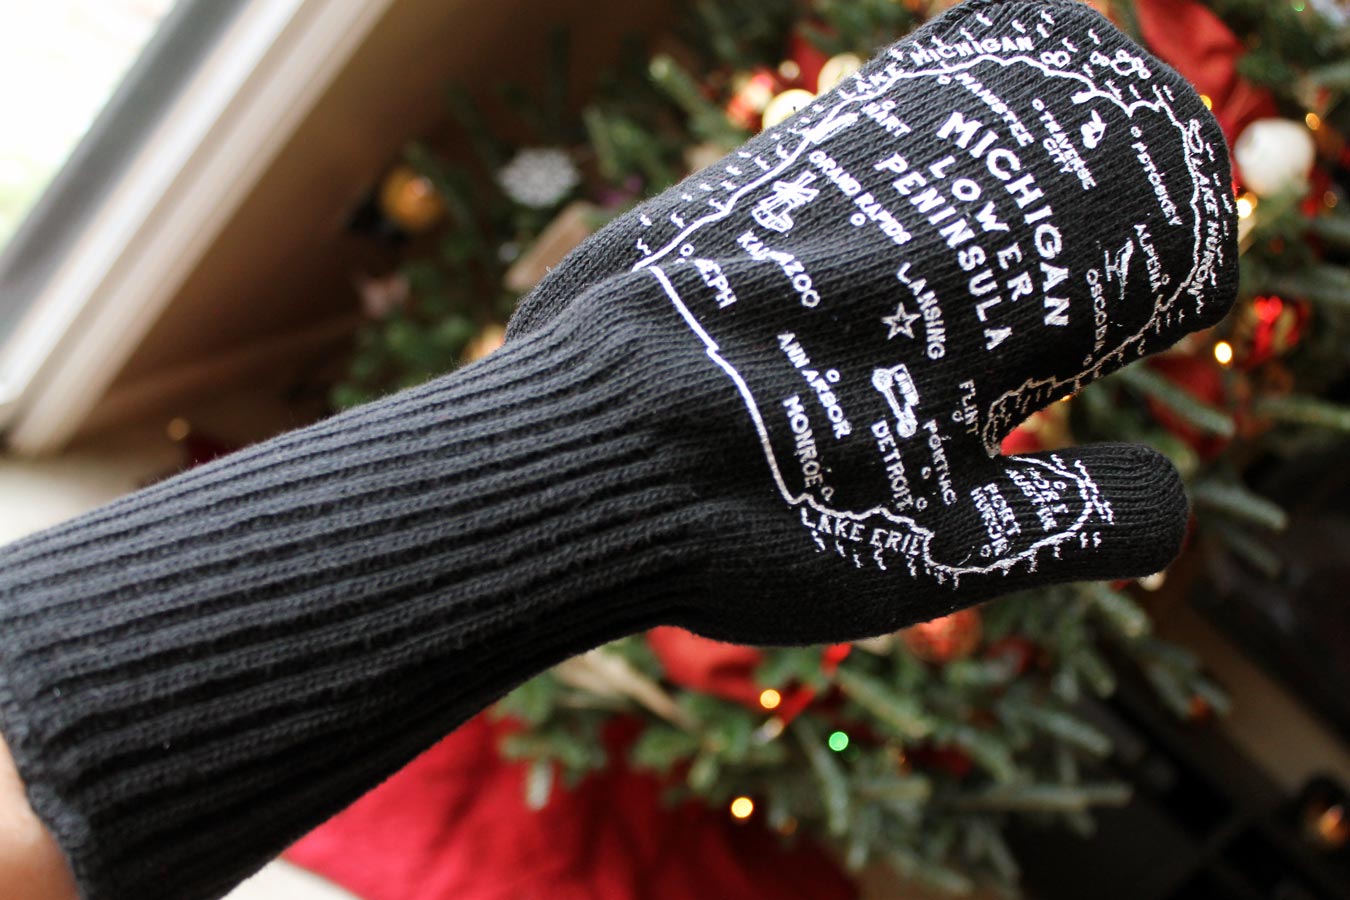 Black L'Oven Mitts from Michigan Mittens! Always have a map on hand - even while baking! // 4 Fun Gift Ideas From Michigan Mittens  (via Wading in Big Shoes)